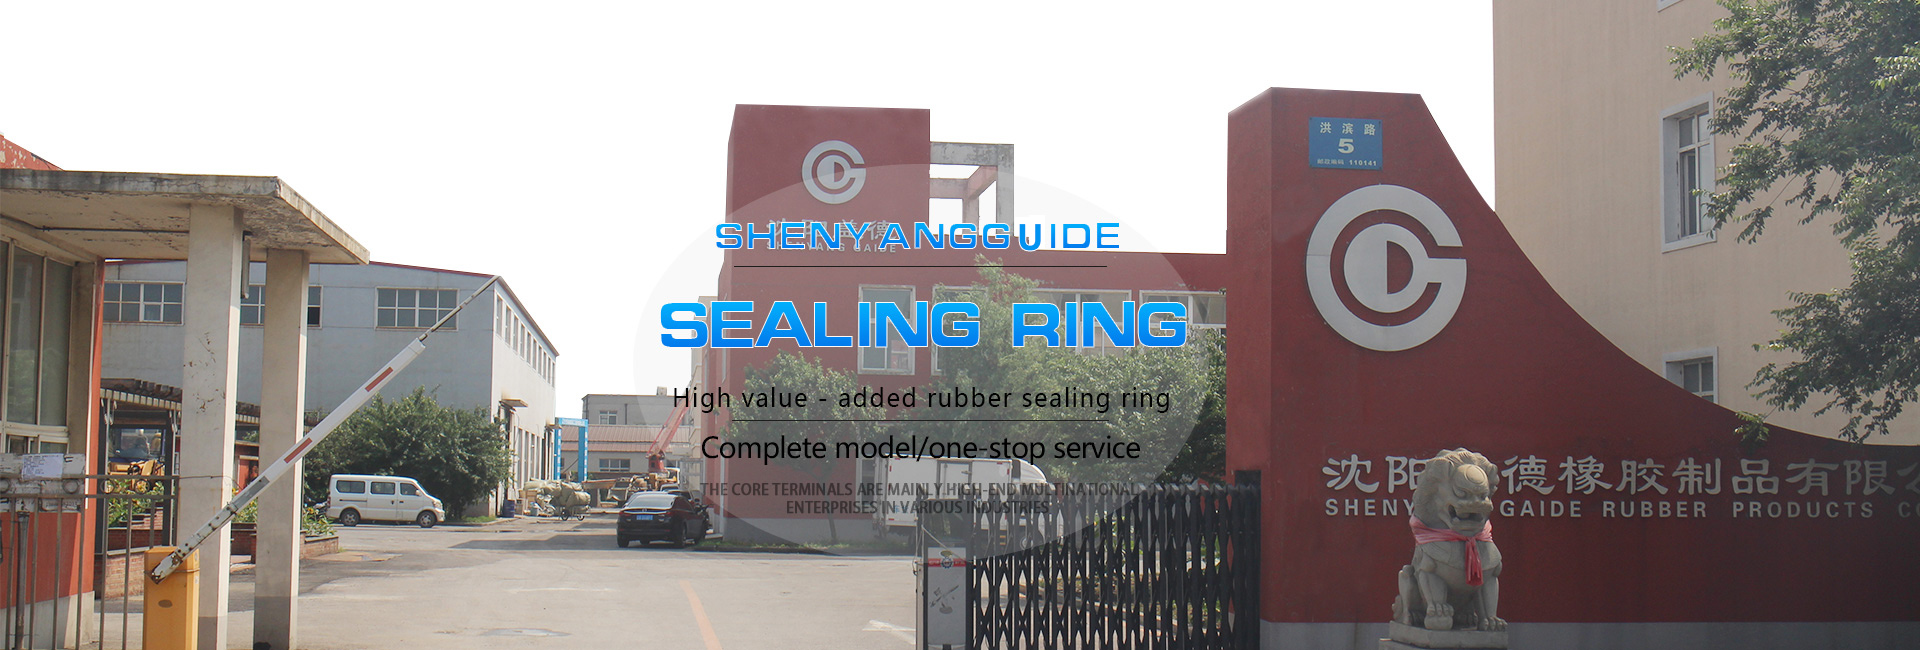 Silicone seal ring